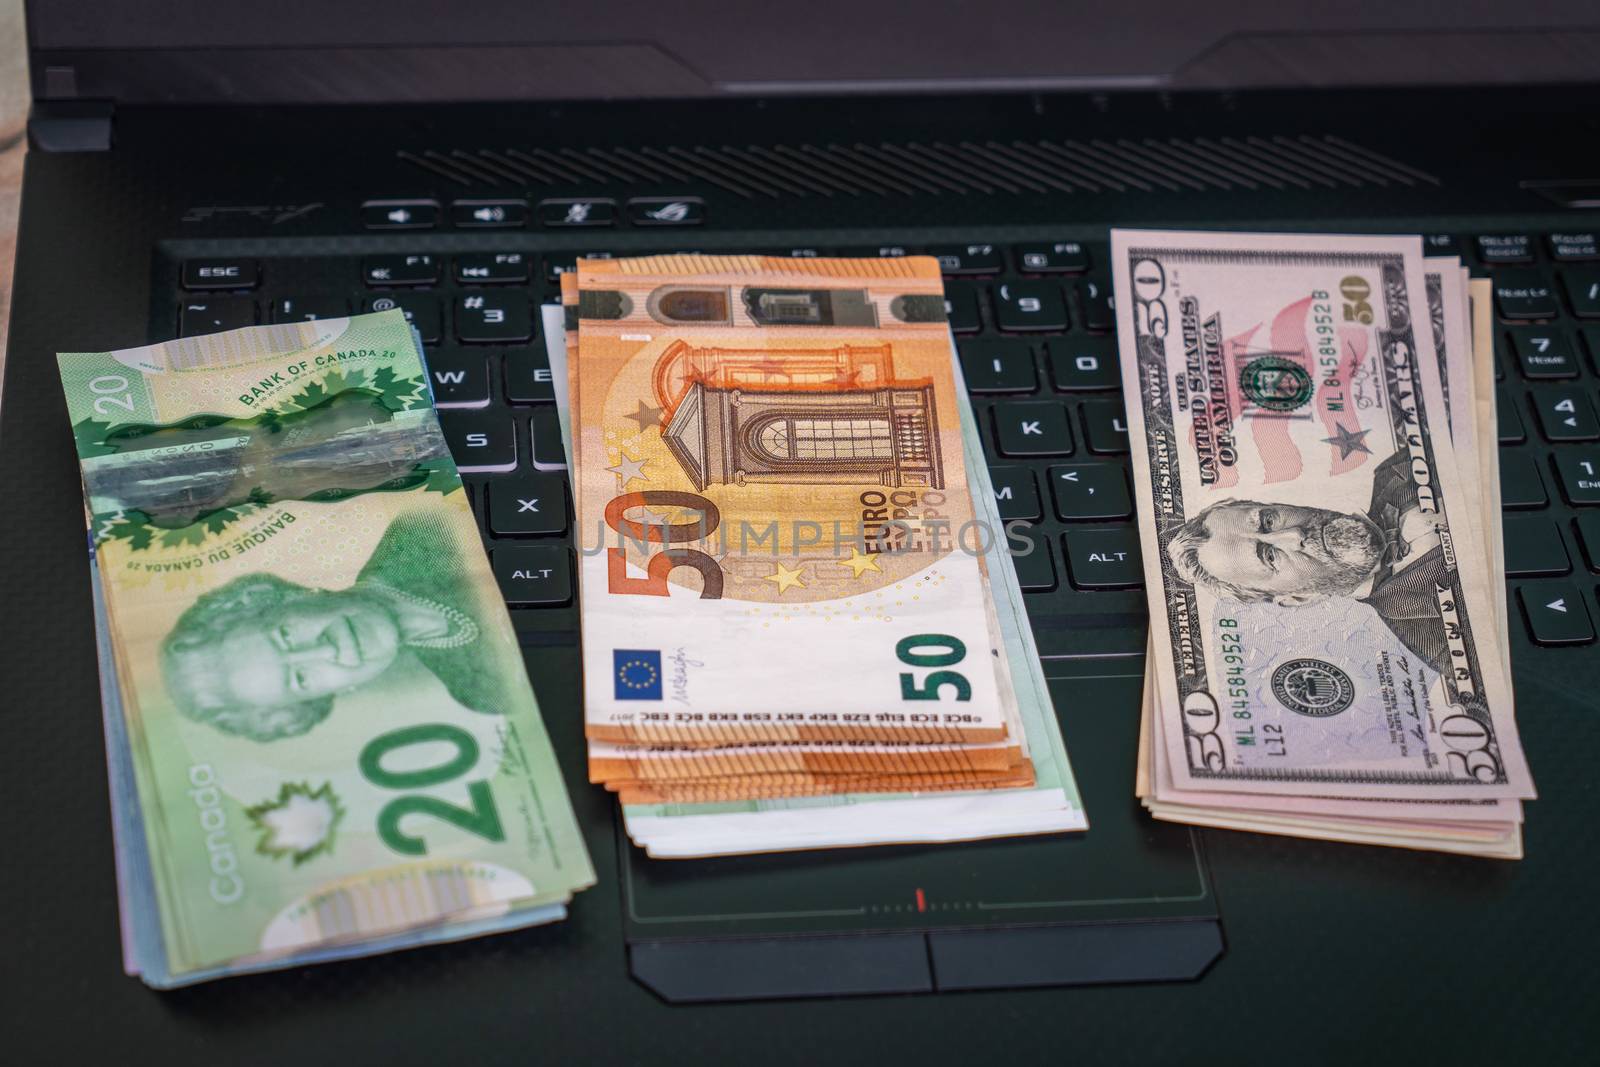 Three groups of banknotes, one of canadian dollars, other of euros and the other of American dollars